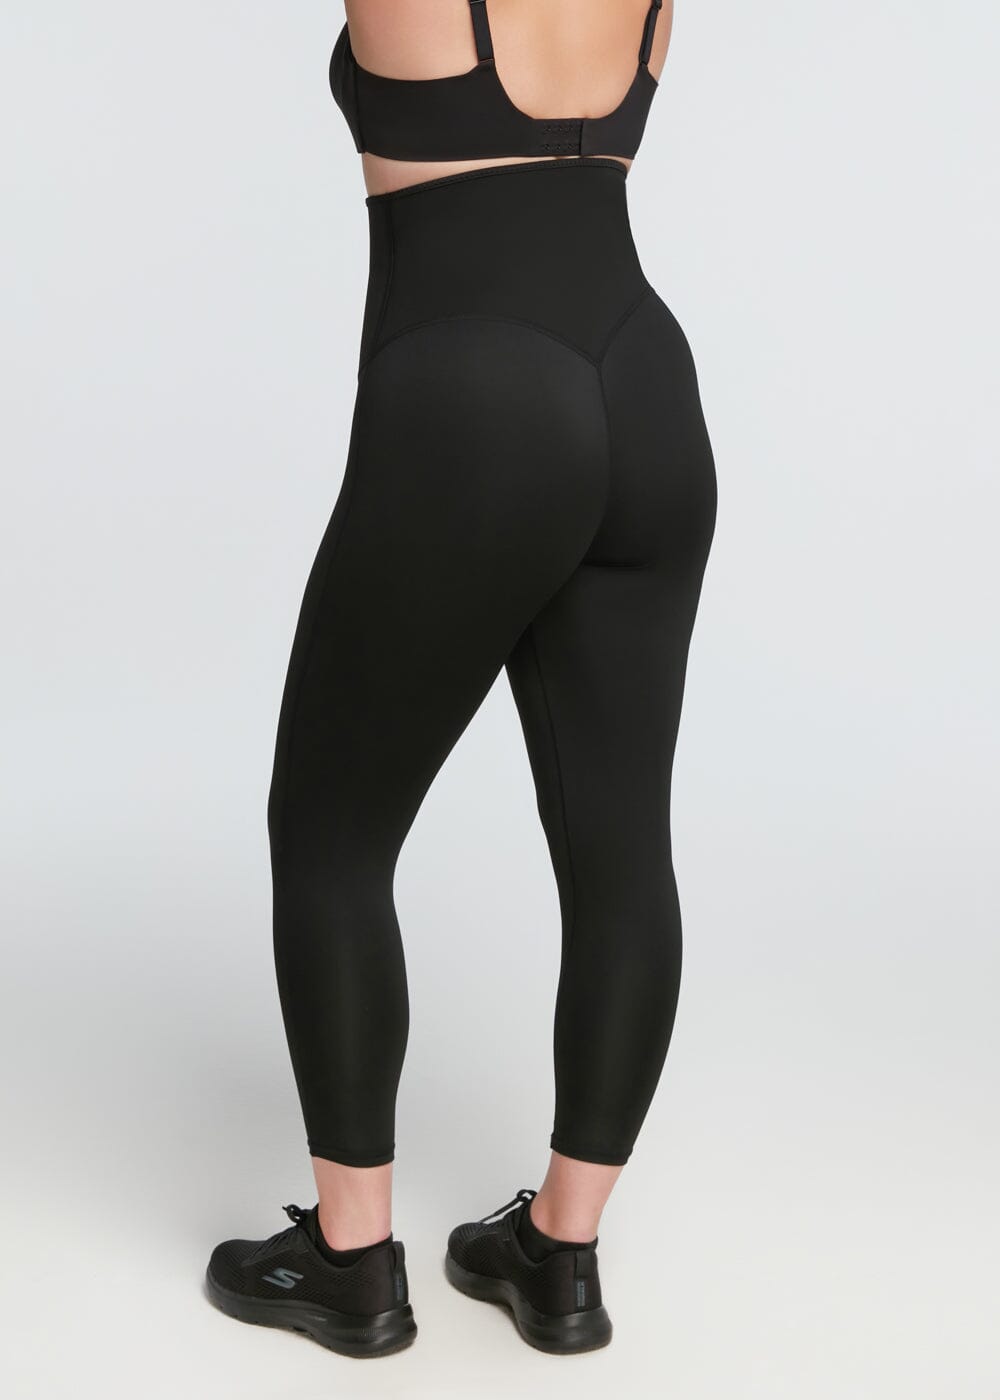 Sauna Pants for Women Weight Loss Sweat Sauna Leggings High Waisted  Compression Hot Thermo(L/XL) price in UAE,  UAE